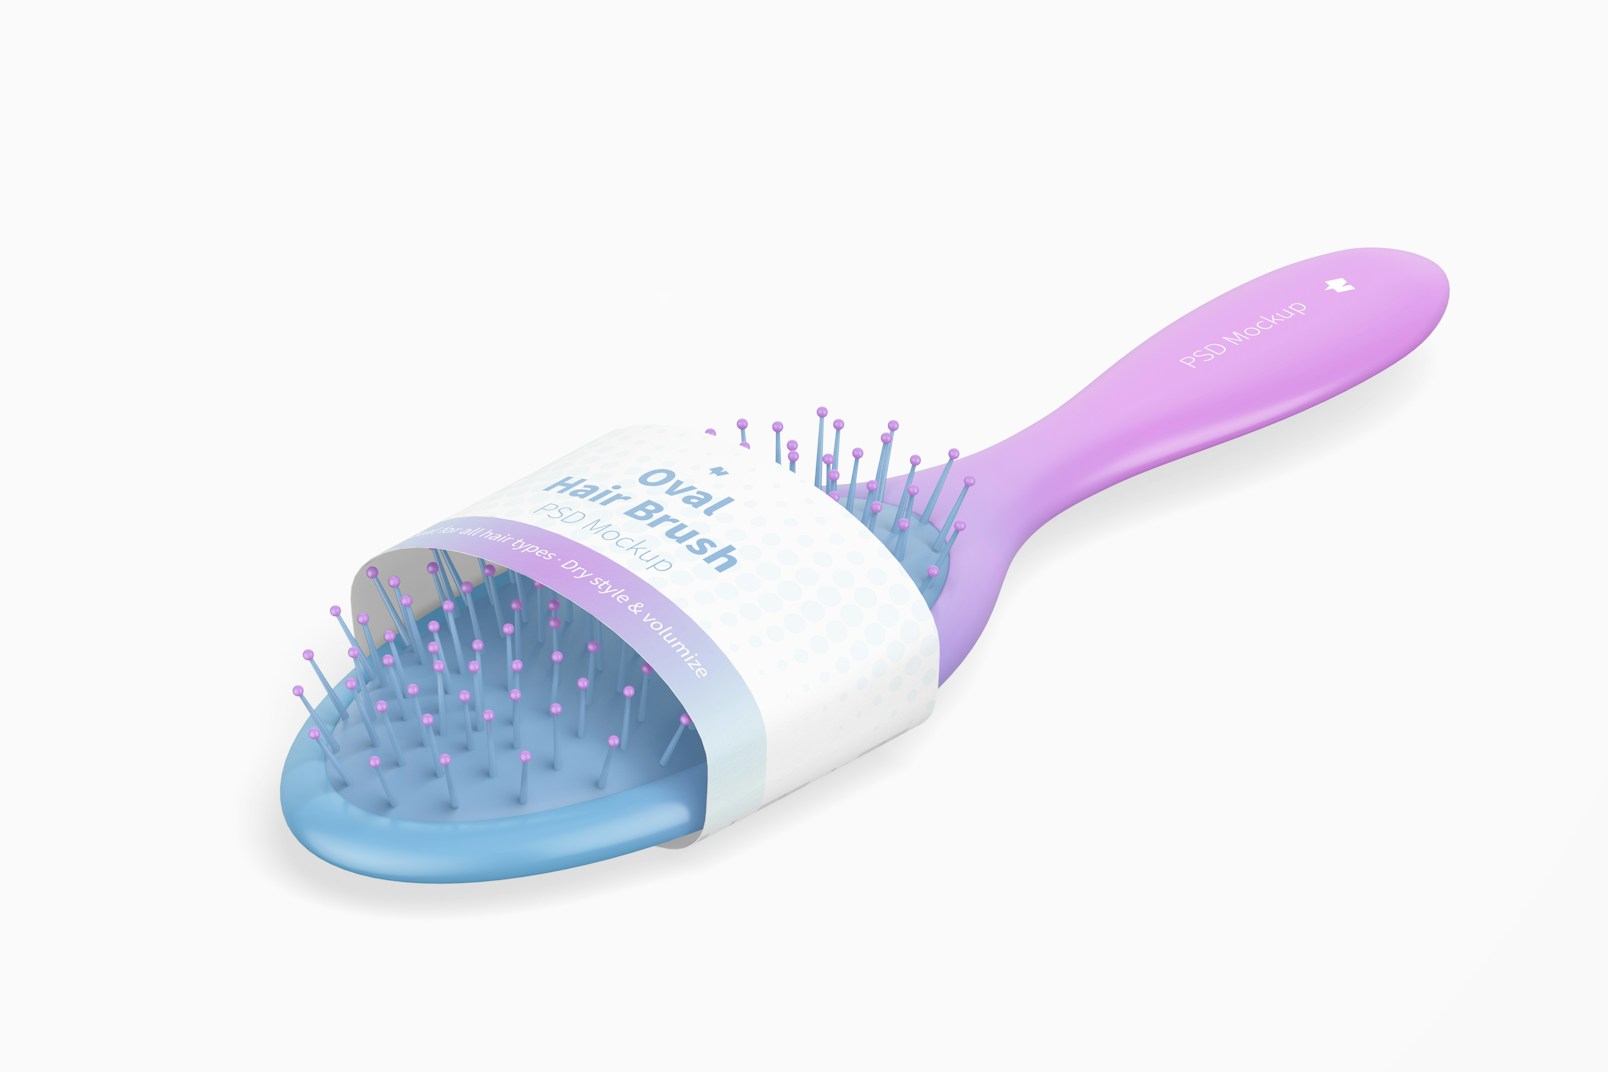 Oval Hair Brush with Label Mockup, Isometric Left View